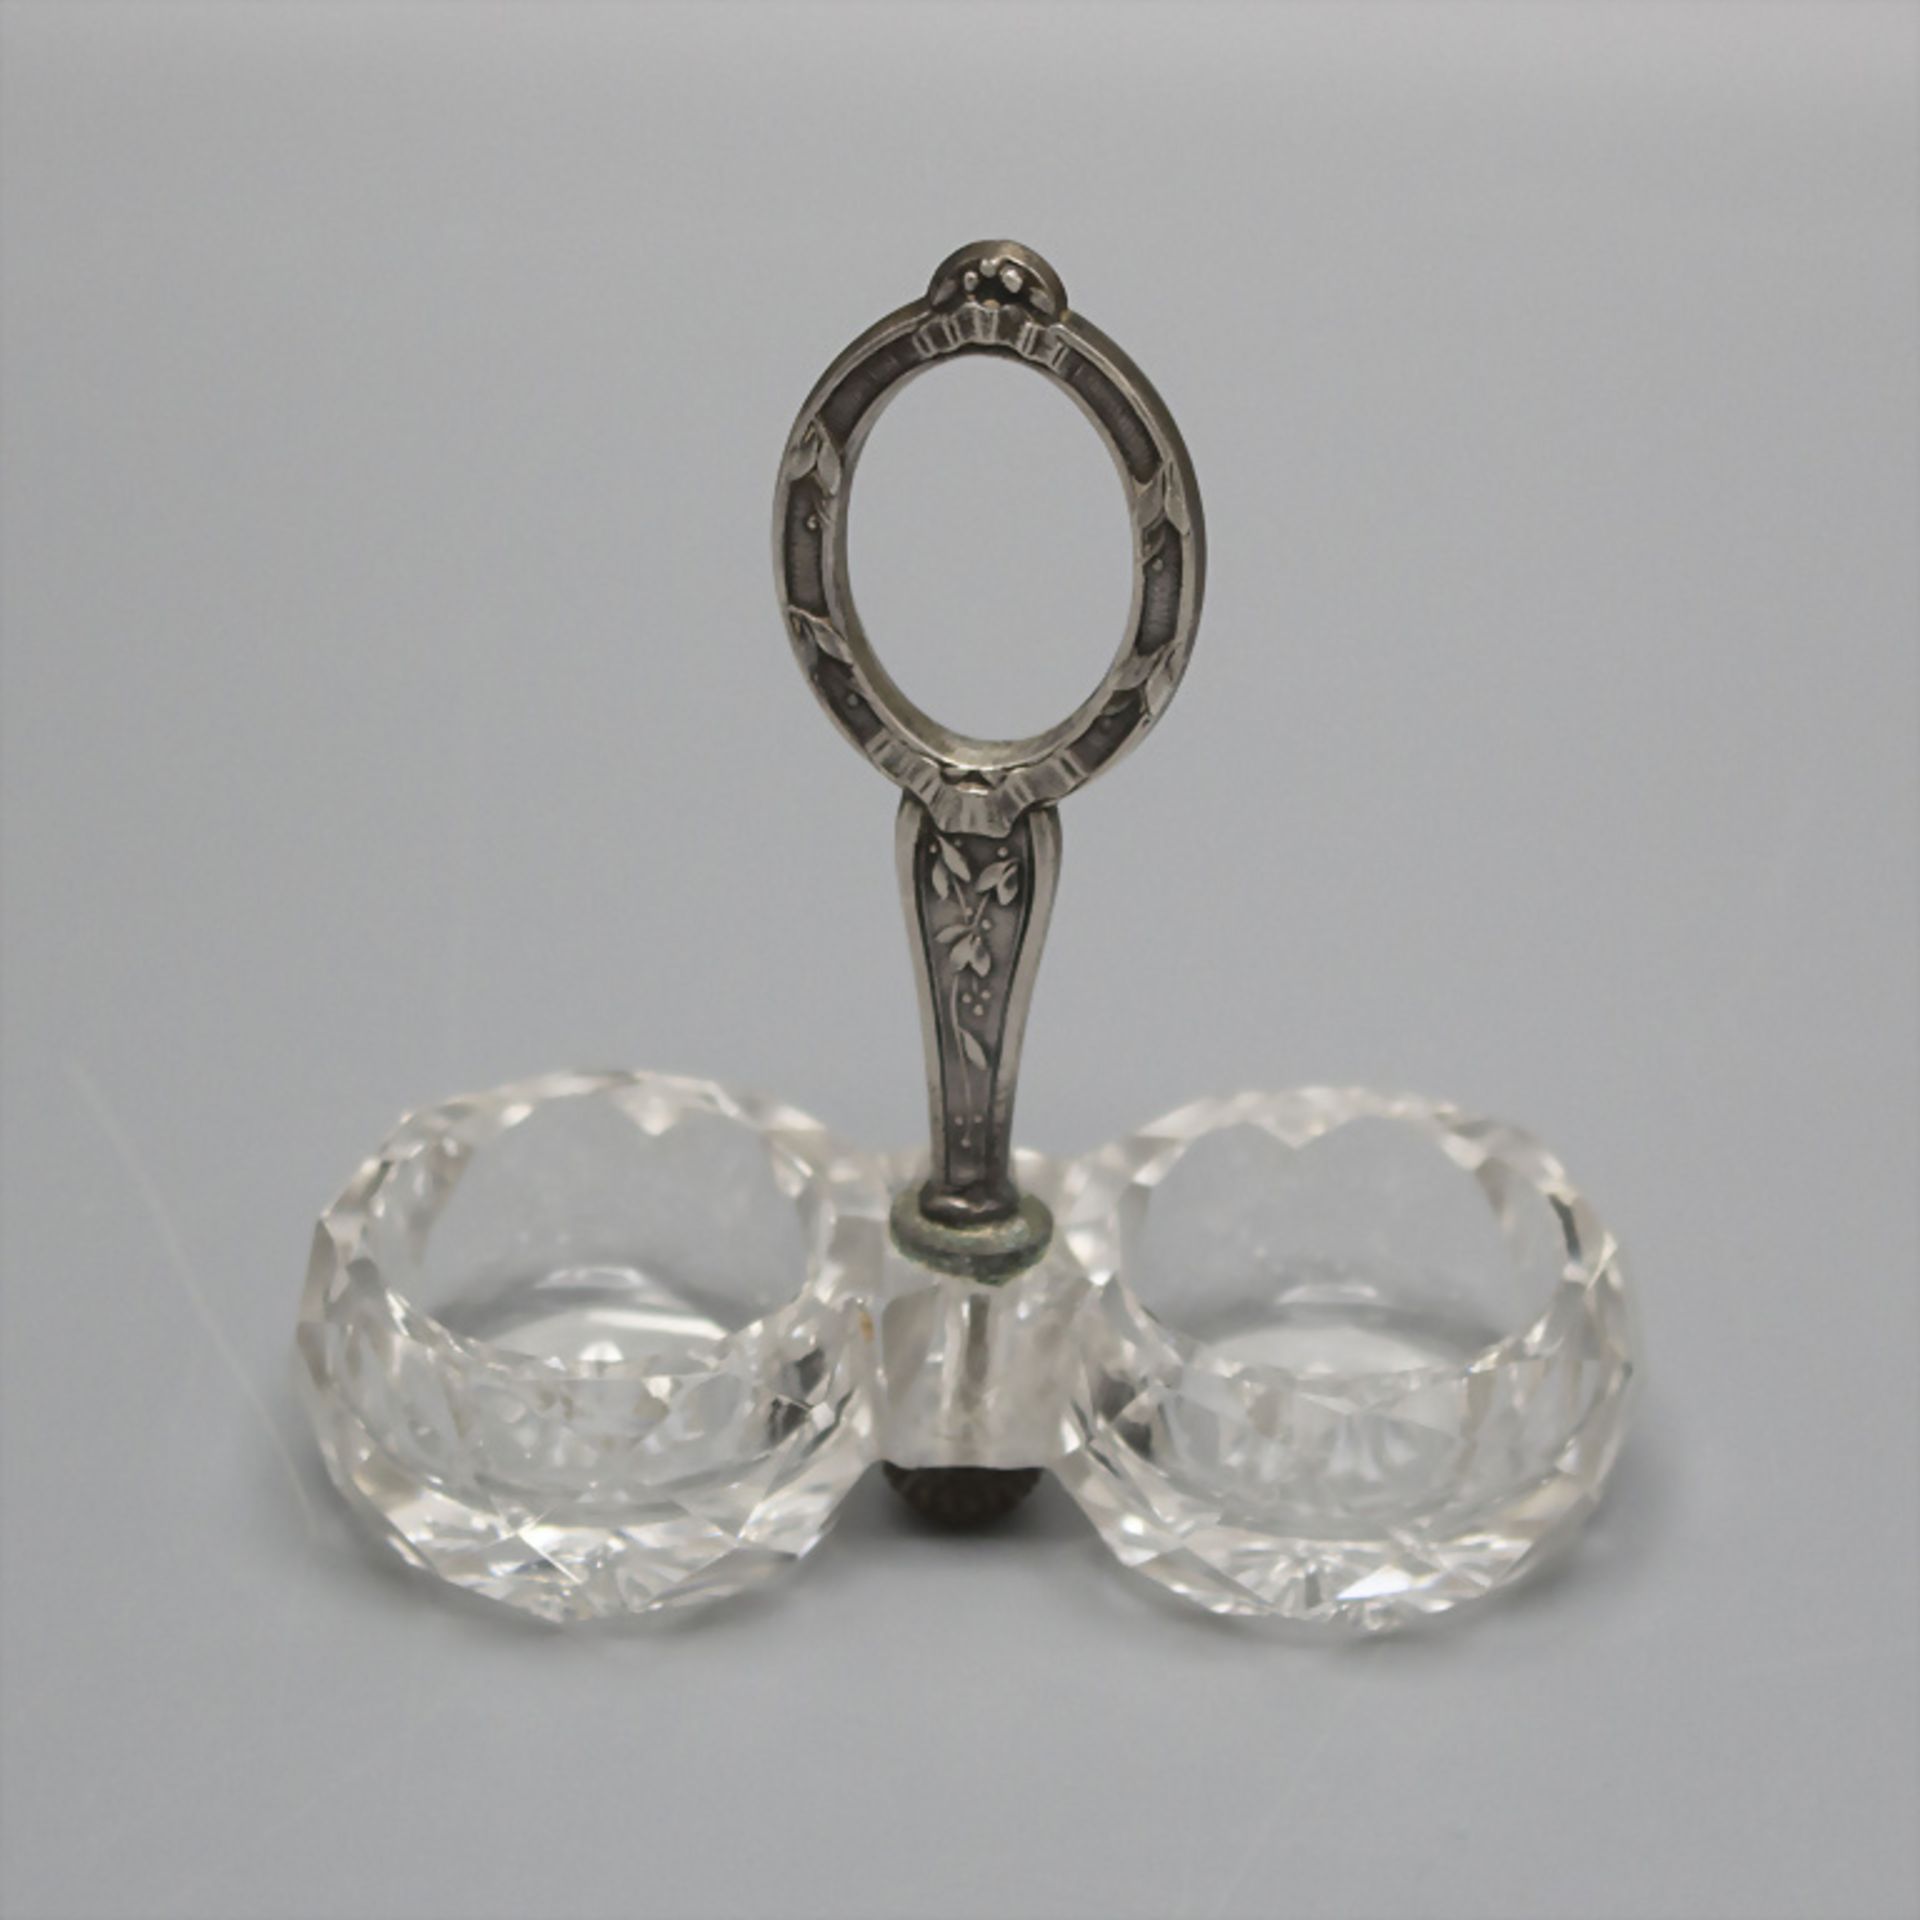 Paar Doppel-Salieren im Etui / A set two silver and glass double salt cellars in a box, Paris, ... - Image 2 of 2